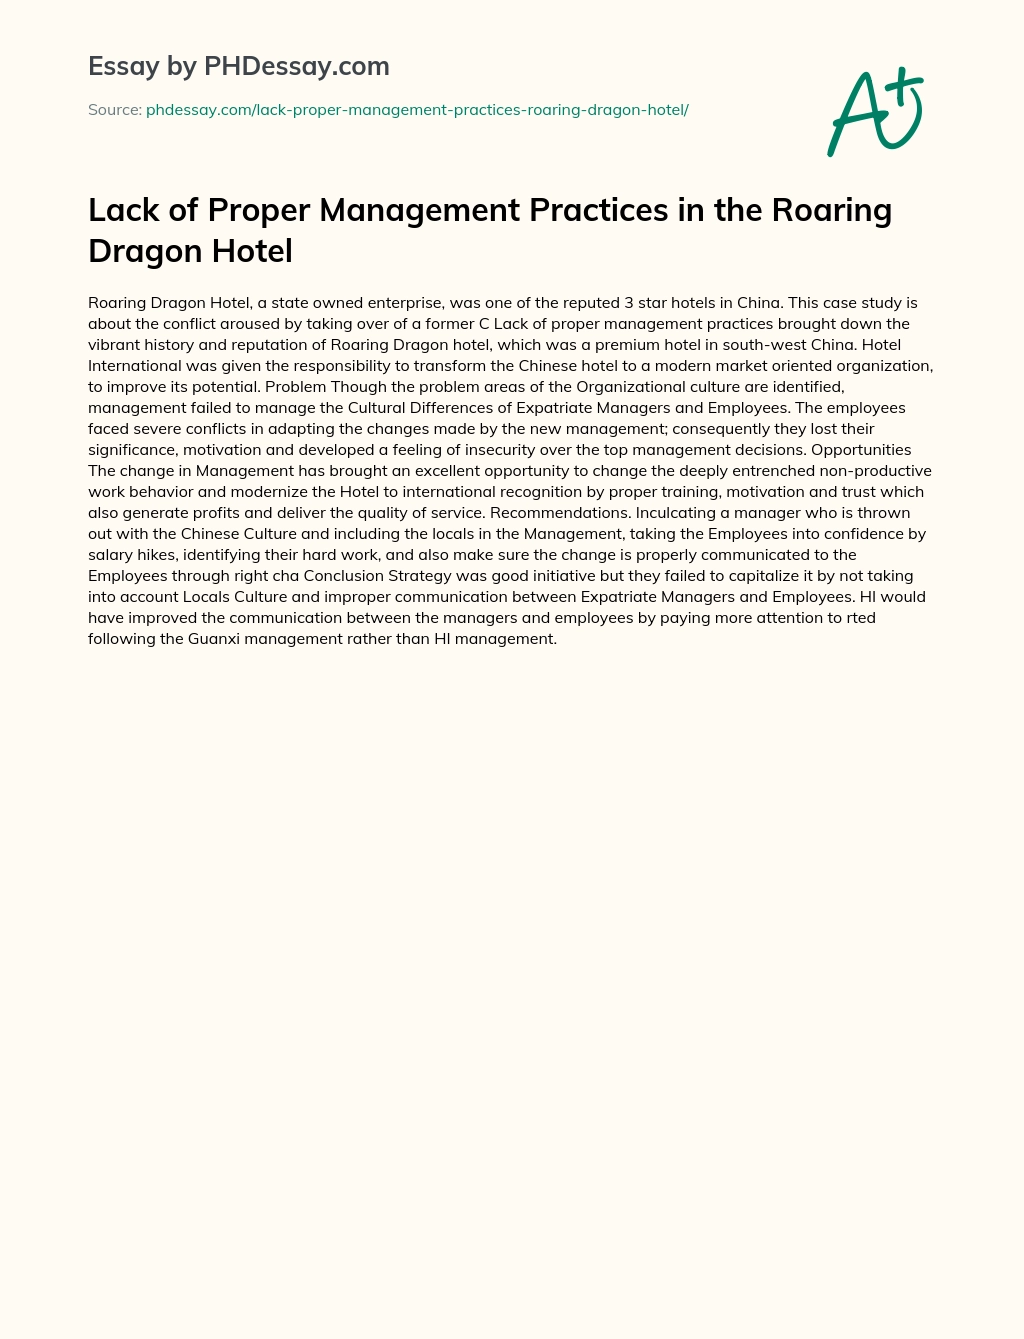 Lack of Proper Management Practices in the Roaring Dragon Hotel essay